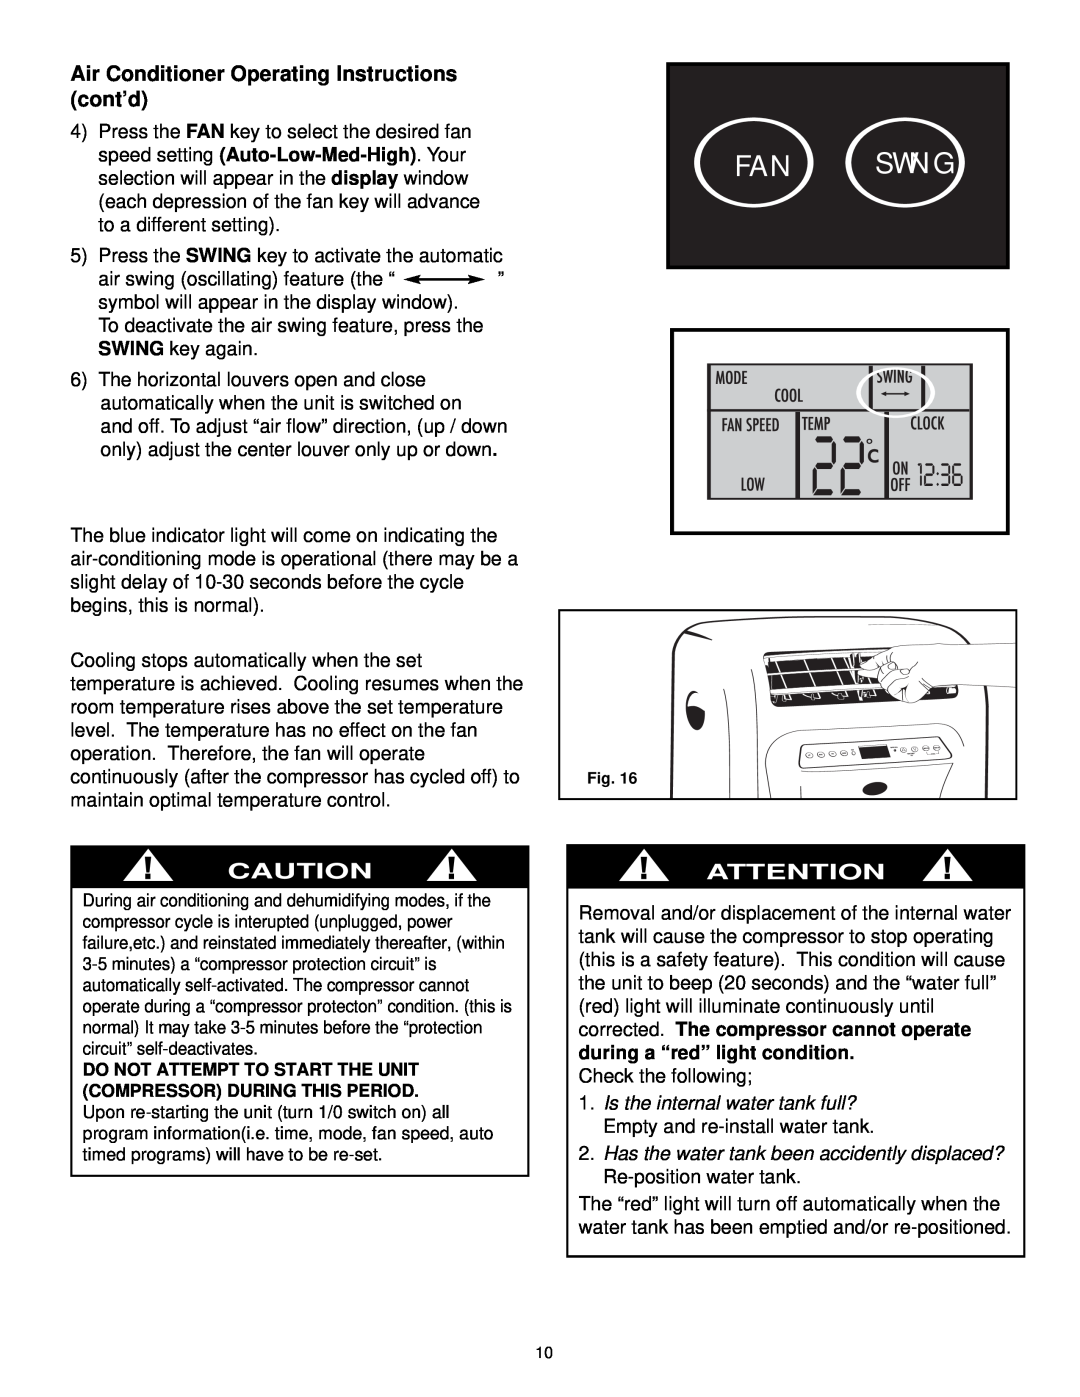 Danby DPAC10030 manual Fan Swing, Air Conditioner Operating Instructions cont’d 